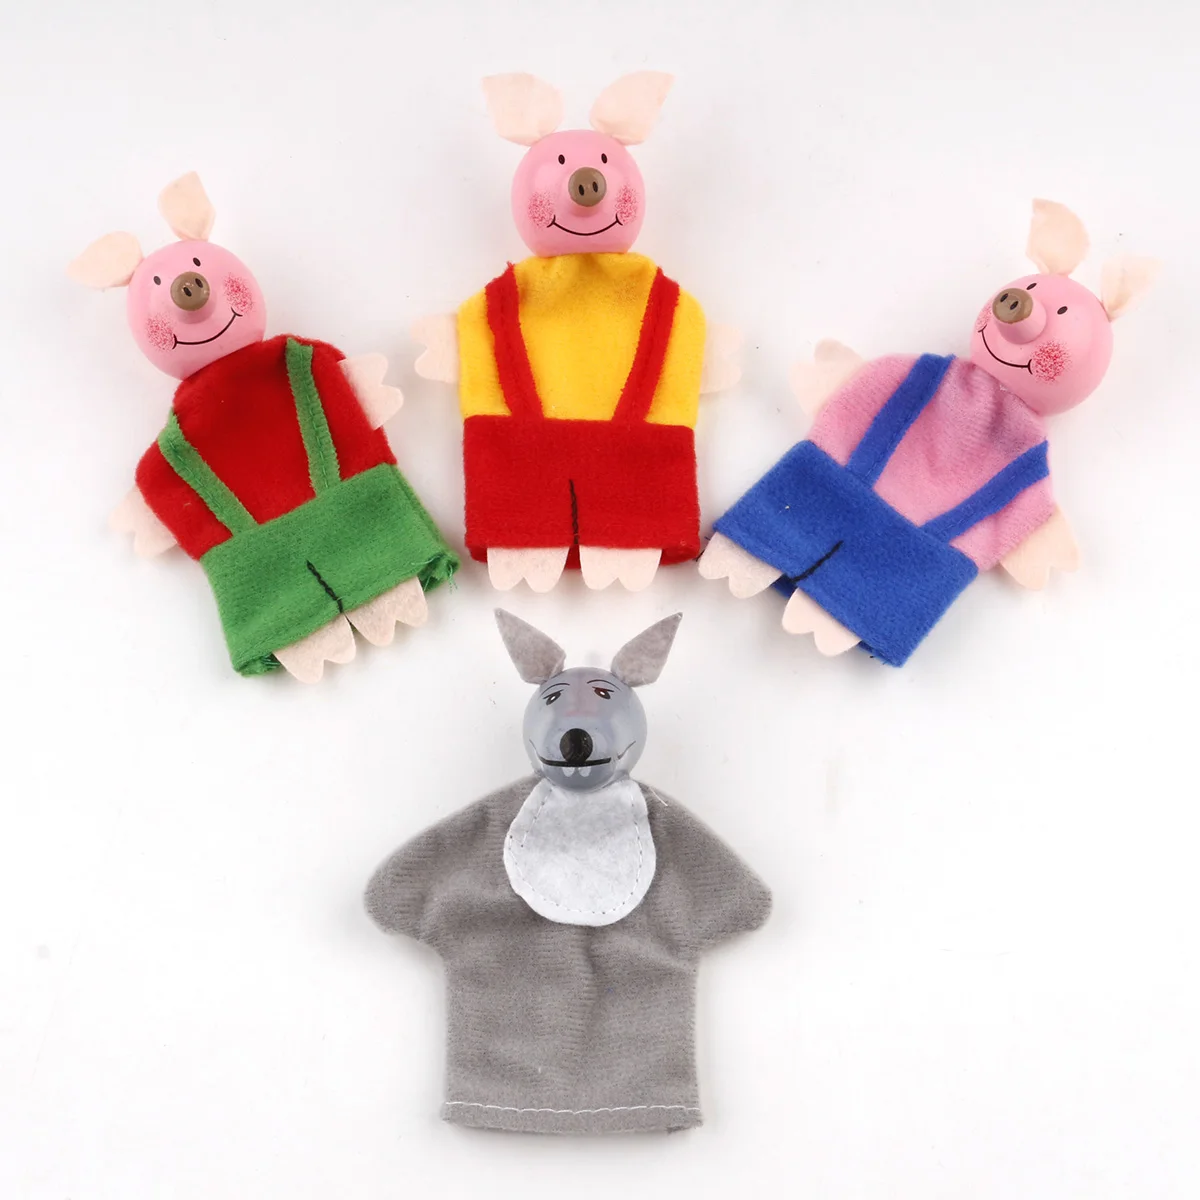 Hand Puppets Doll Animal for Kids Children Theater Baby Plush Toy Family Finger Puppets Set Cloth